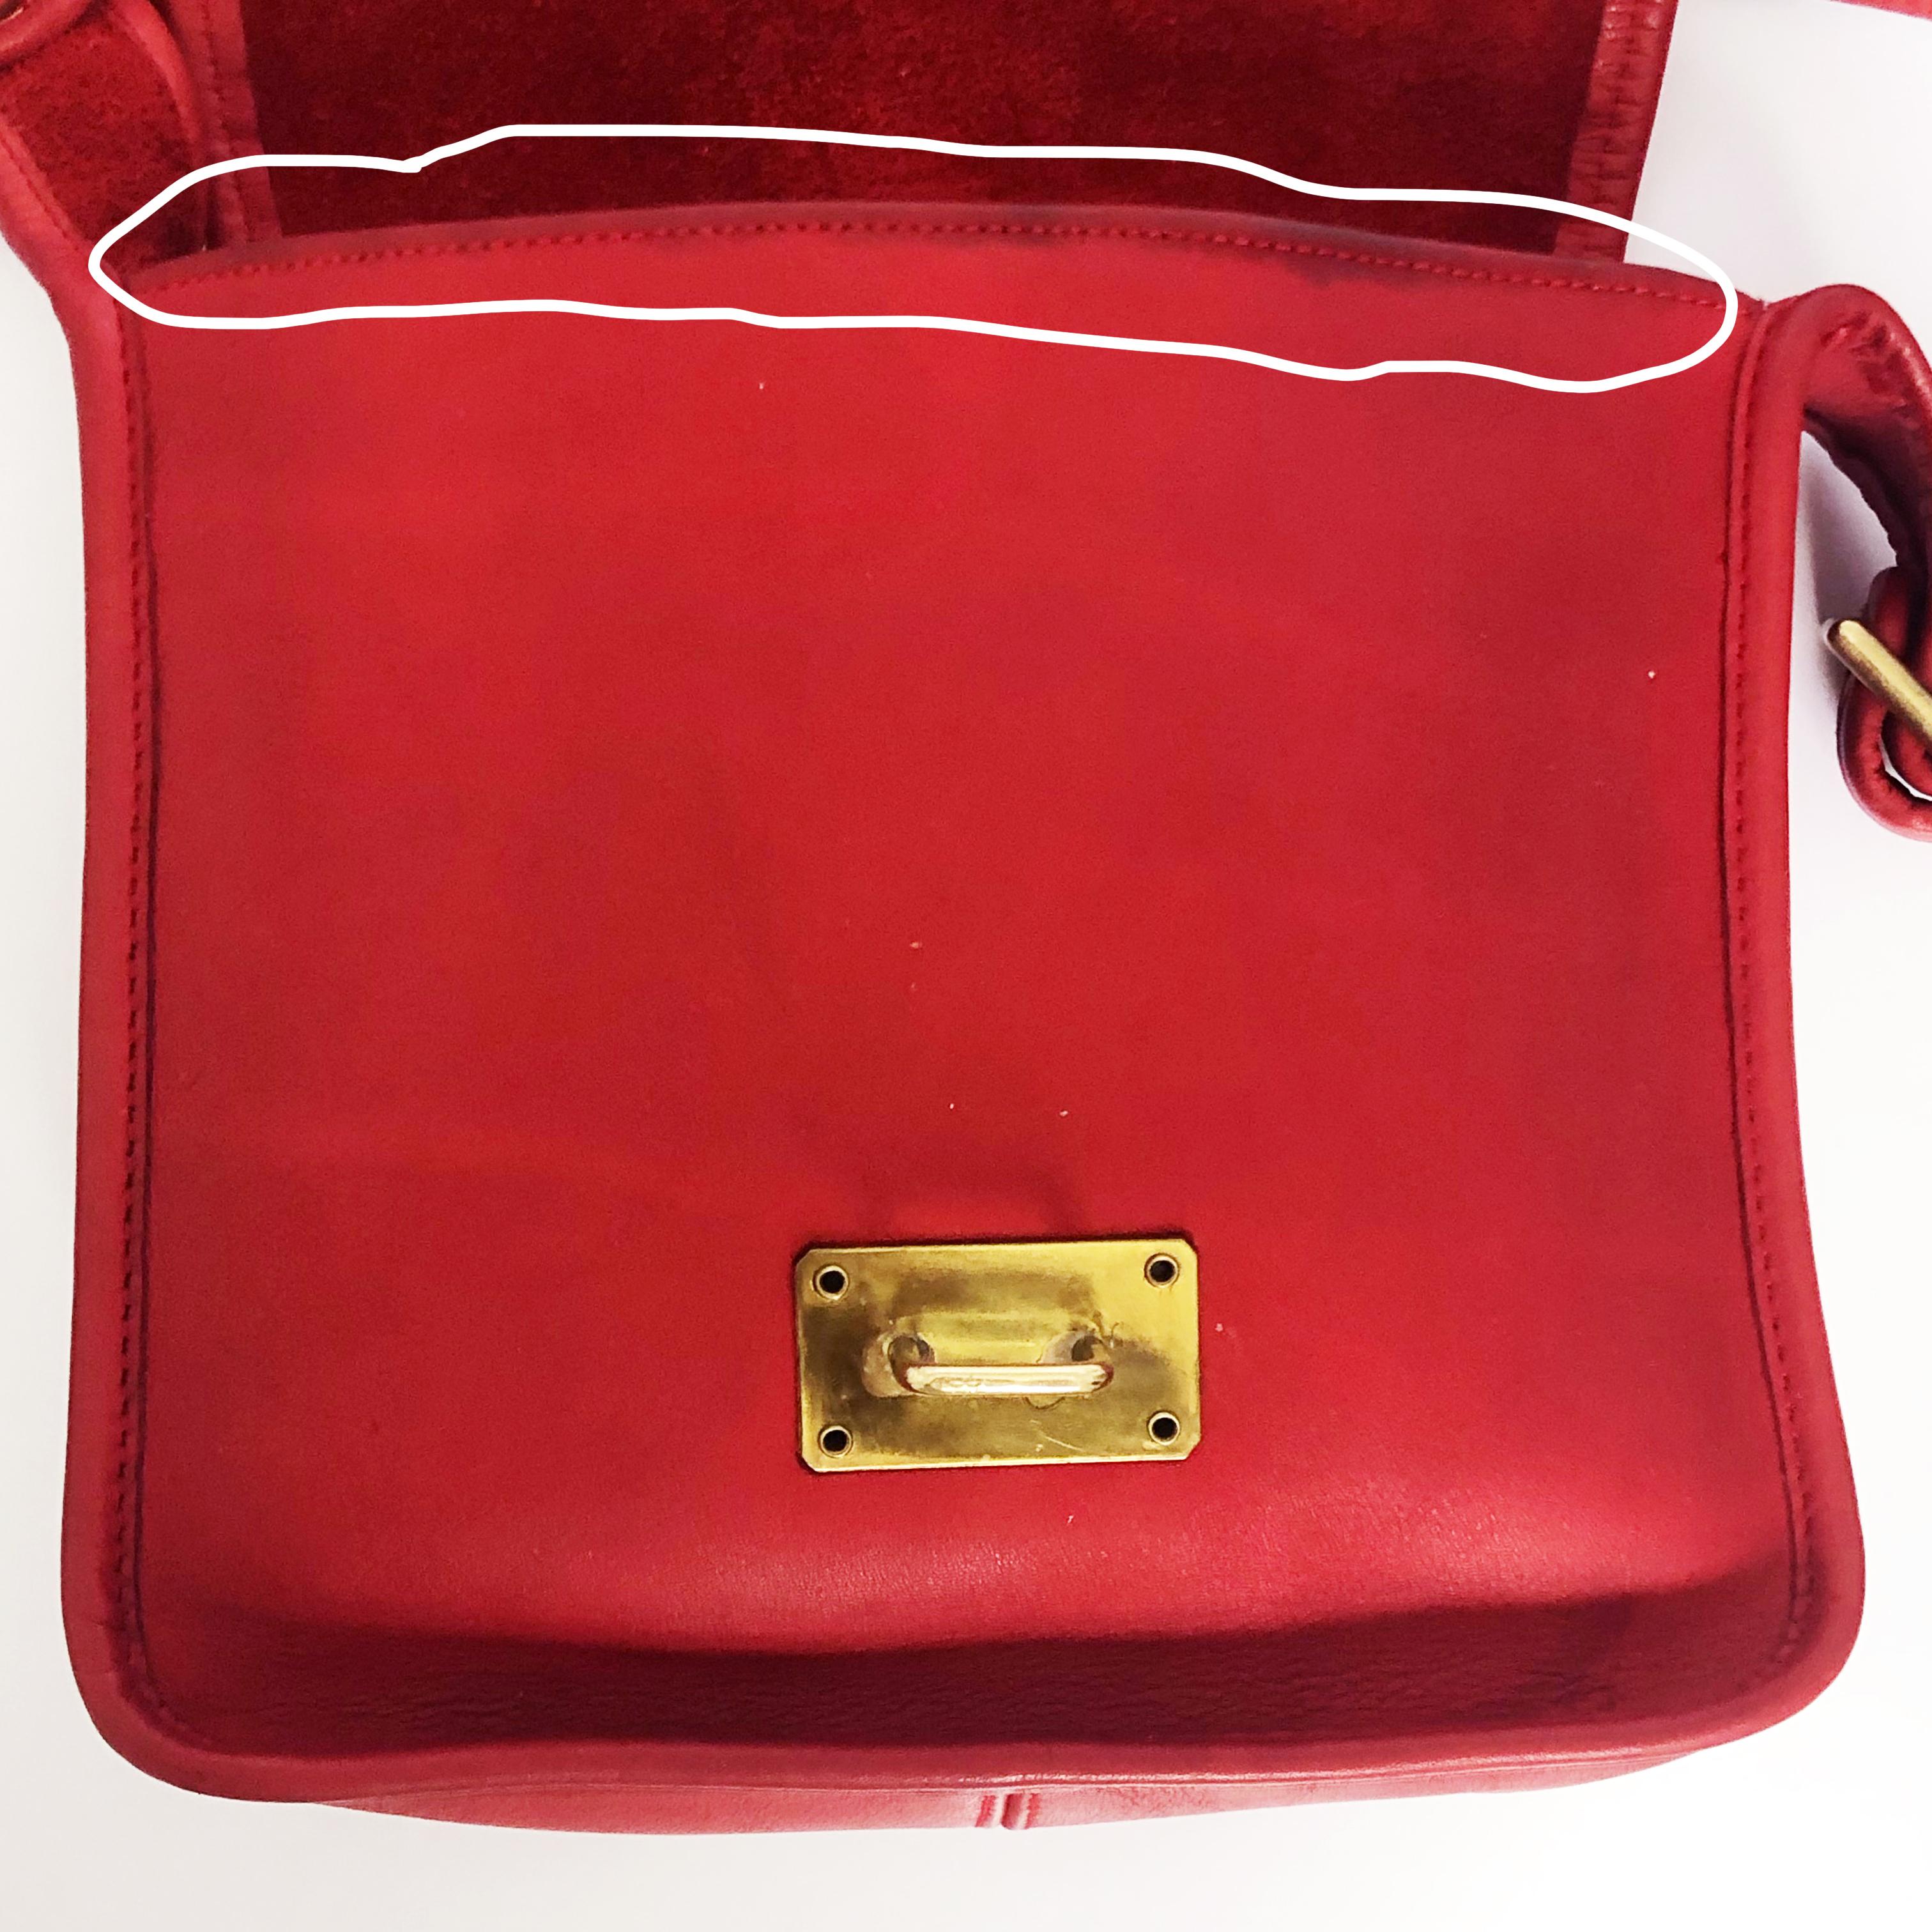 Bonnie Cashin for Coach Shoulder Bag with Hasp Lock Red Leather Vintage 70s Rare 1